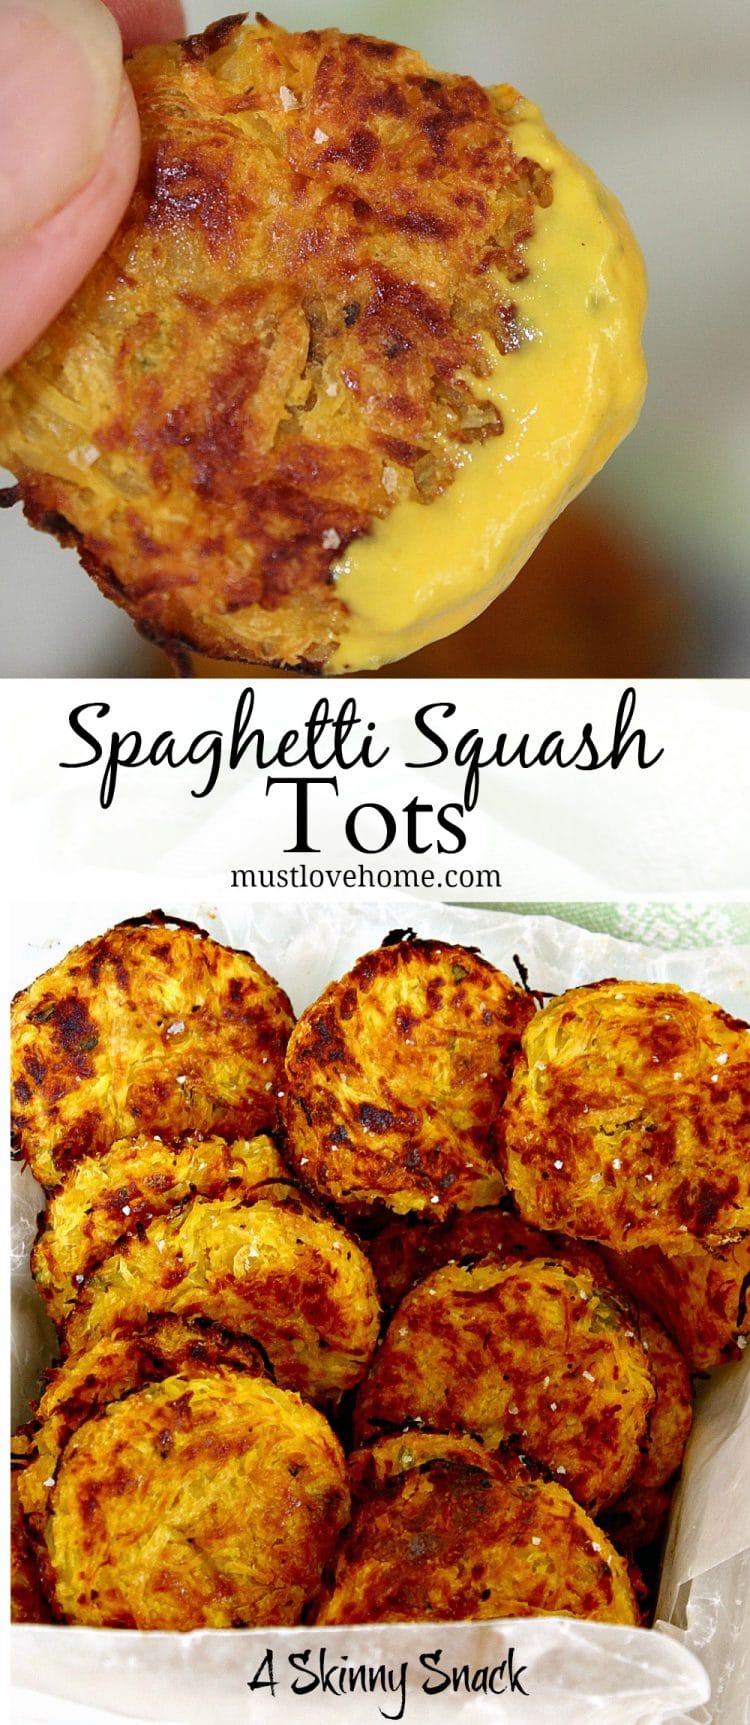 Spaghetti Squash Tots are an addictive crispy snack that will have you reaching for more! These little tots are so tasty it will be hard to believe they are healthy and low-calorie too!